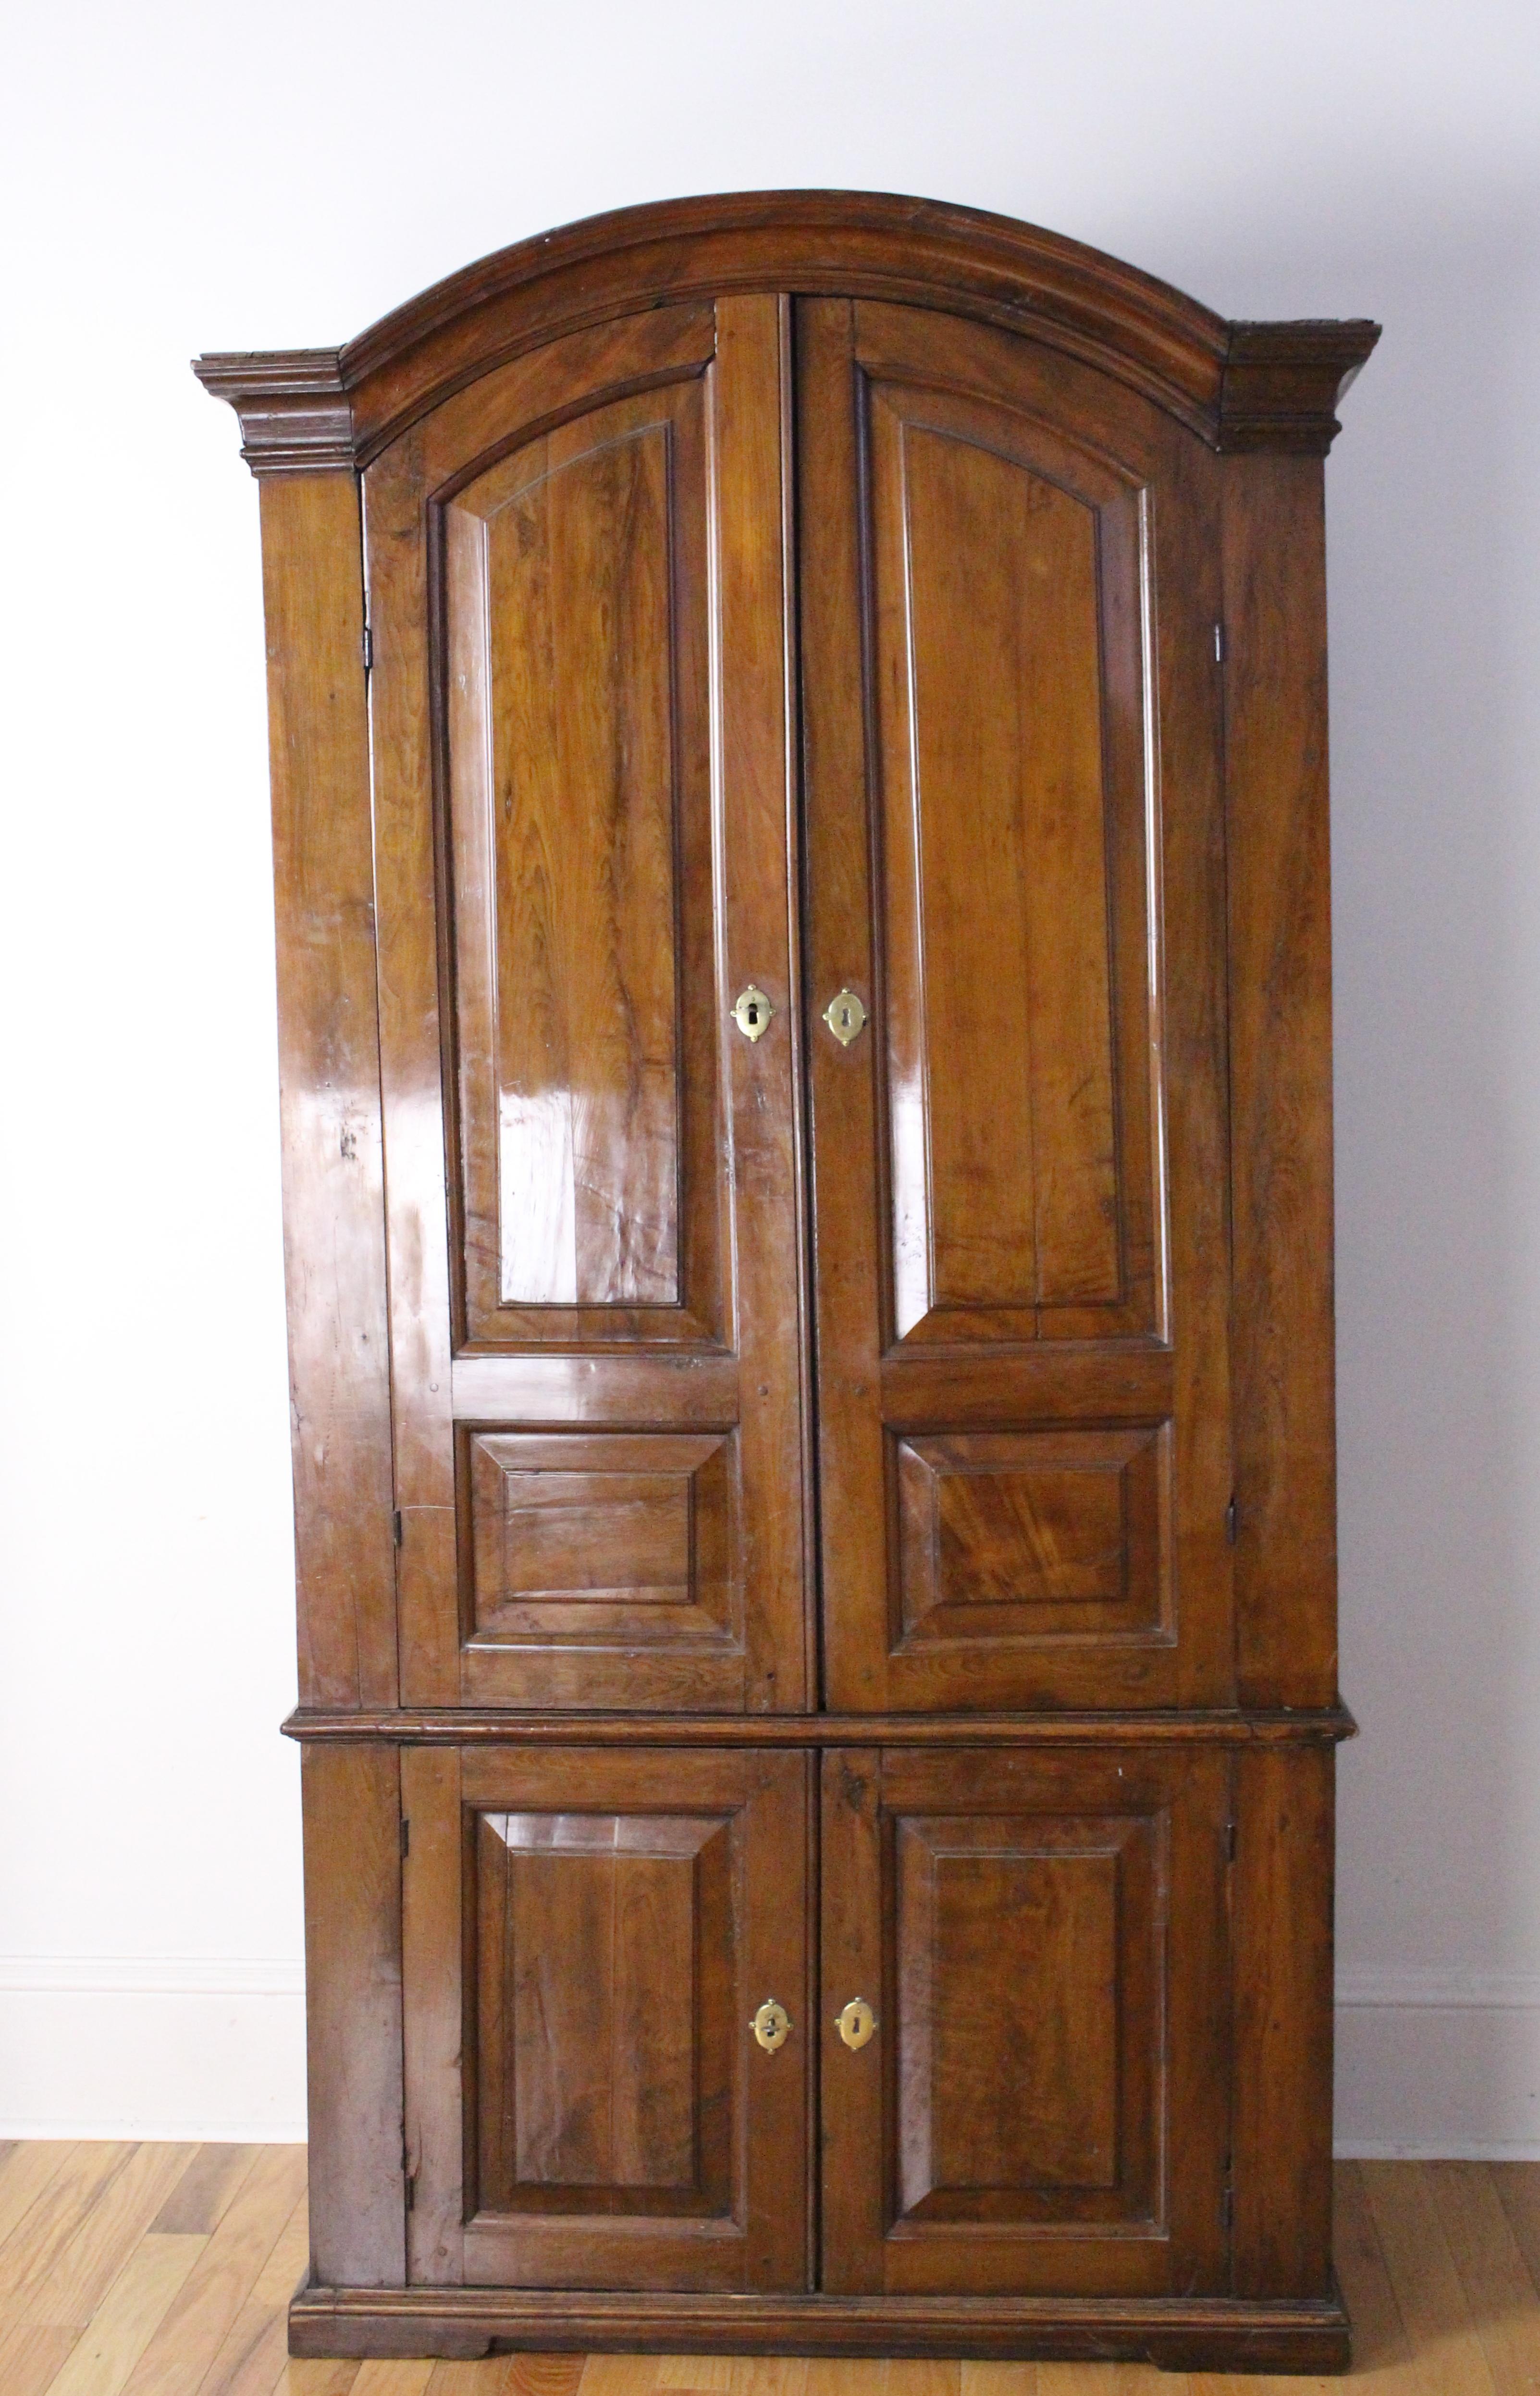 A large and imposing yew cupboard with graceful lines, wonderful rich color and very good patina. Good roomy storage piece with keys for both upper and lower cabinets. The piece has two issues. Though we have tried, we cannot quite correct the